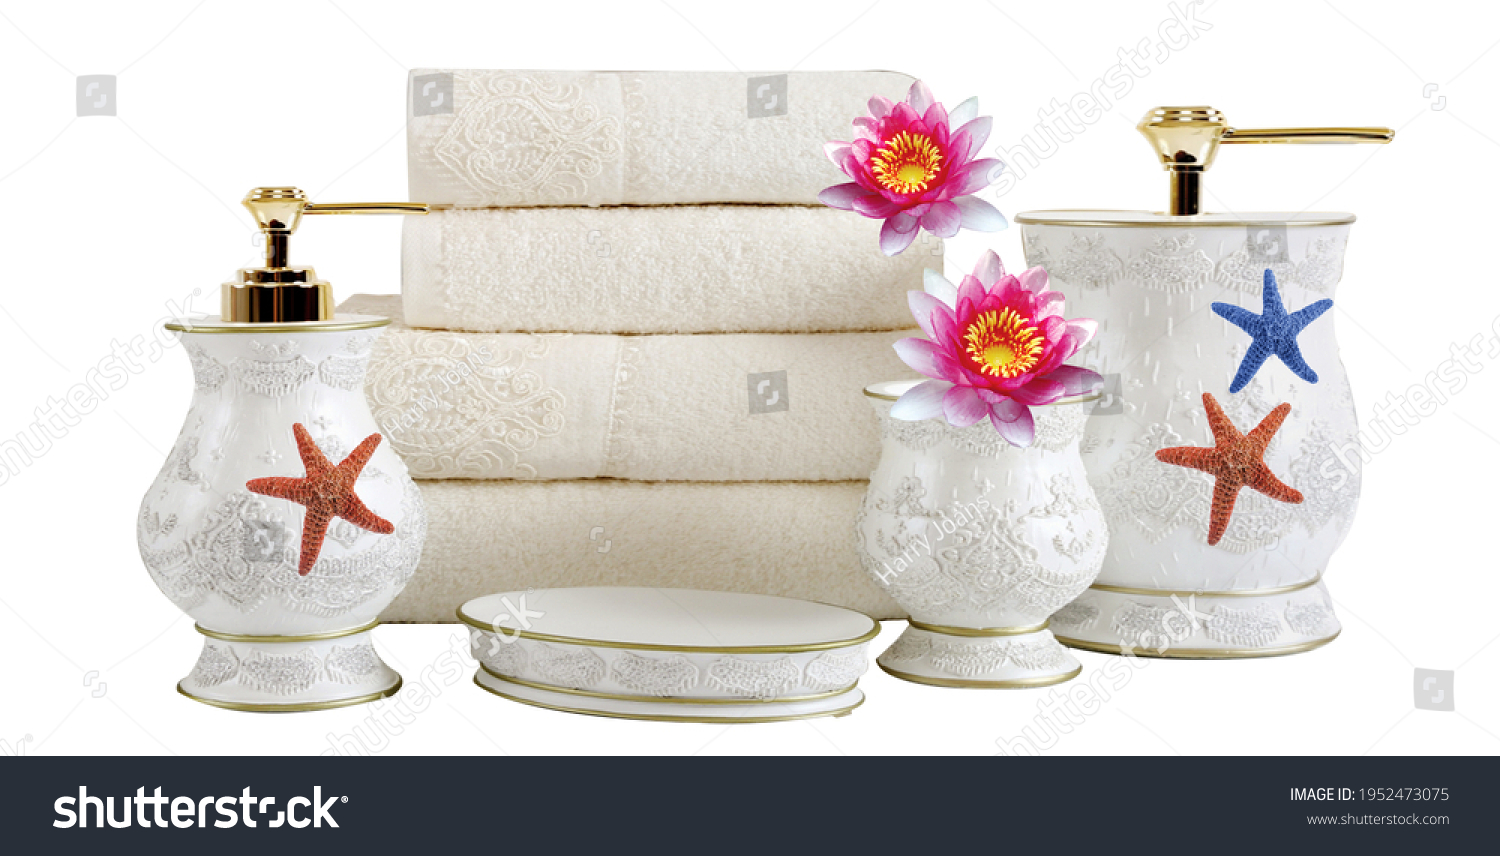 Bathroom body care soap towels white objects, white background in towels, hand wash shampoo flower #1952473075